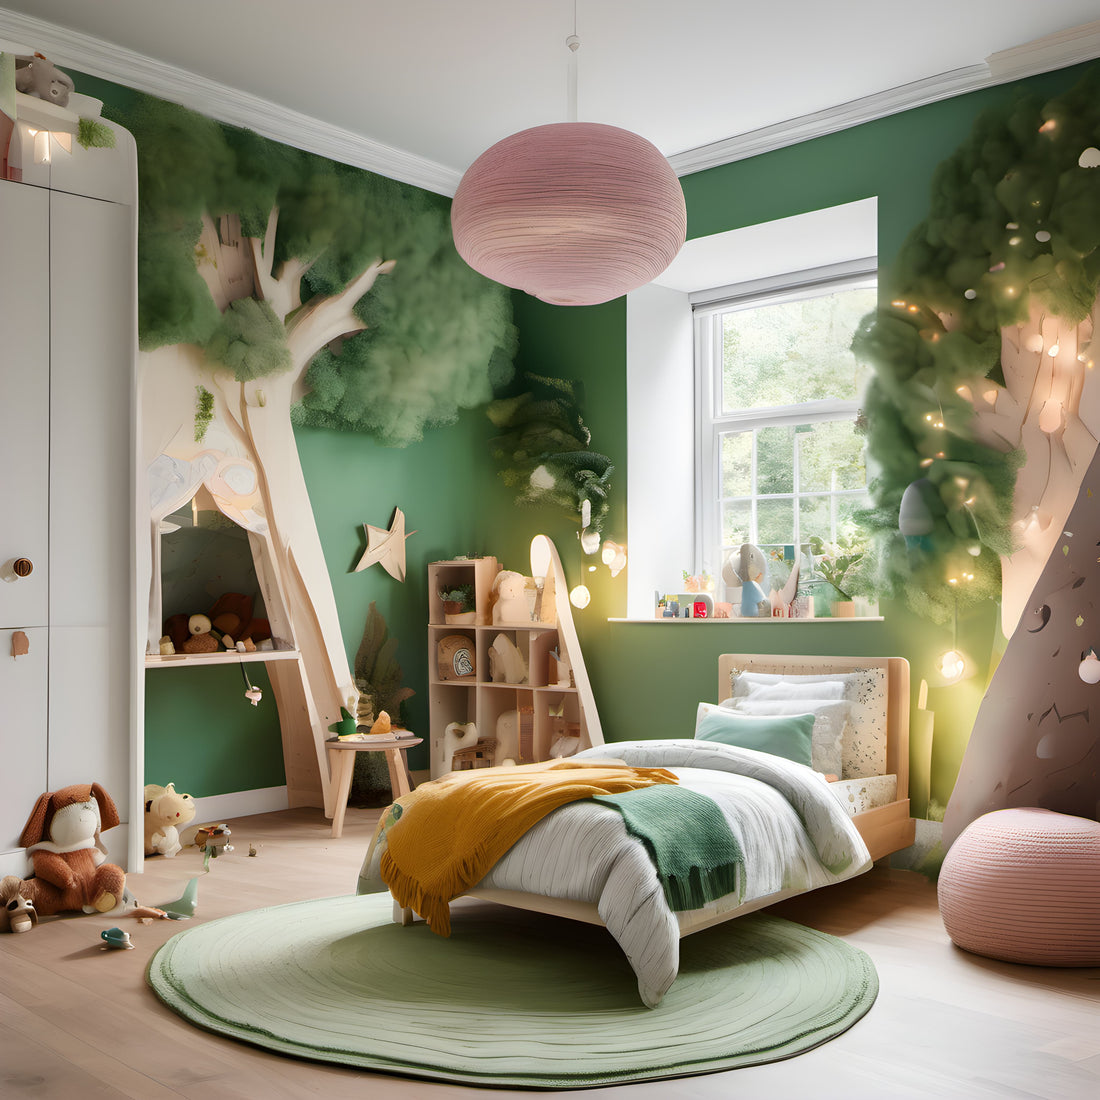 Creating a Colourful and Fun Interior for Your Child